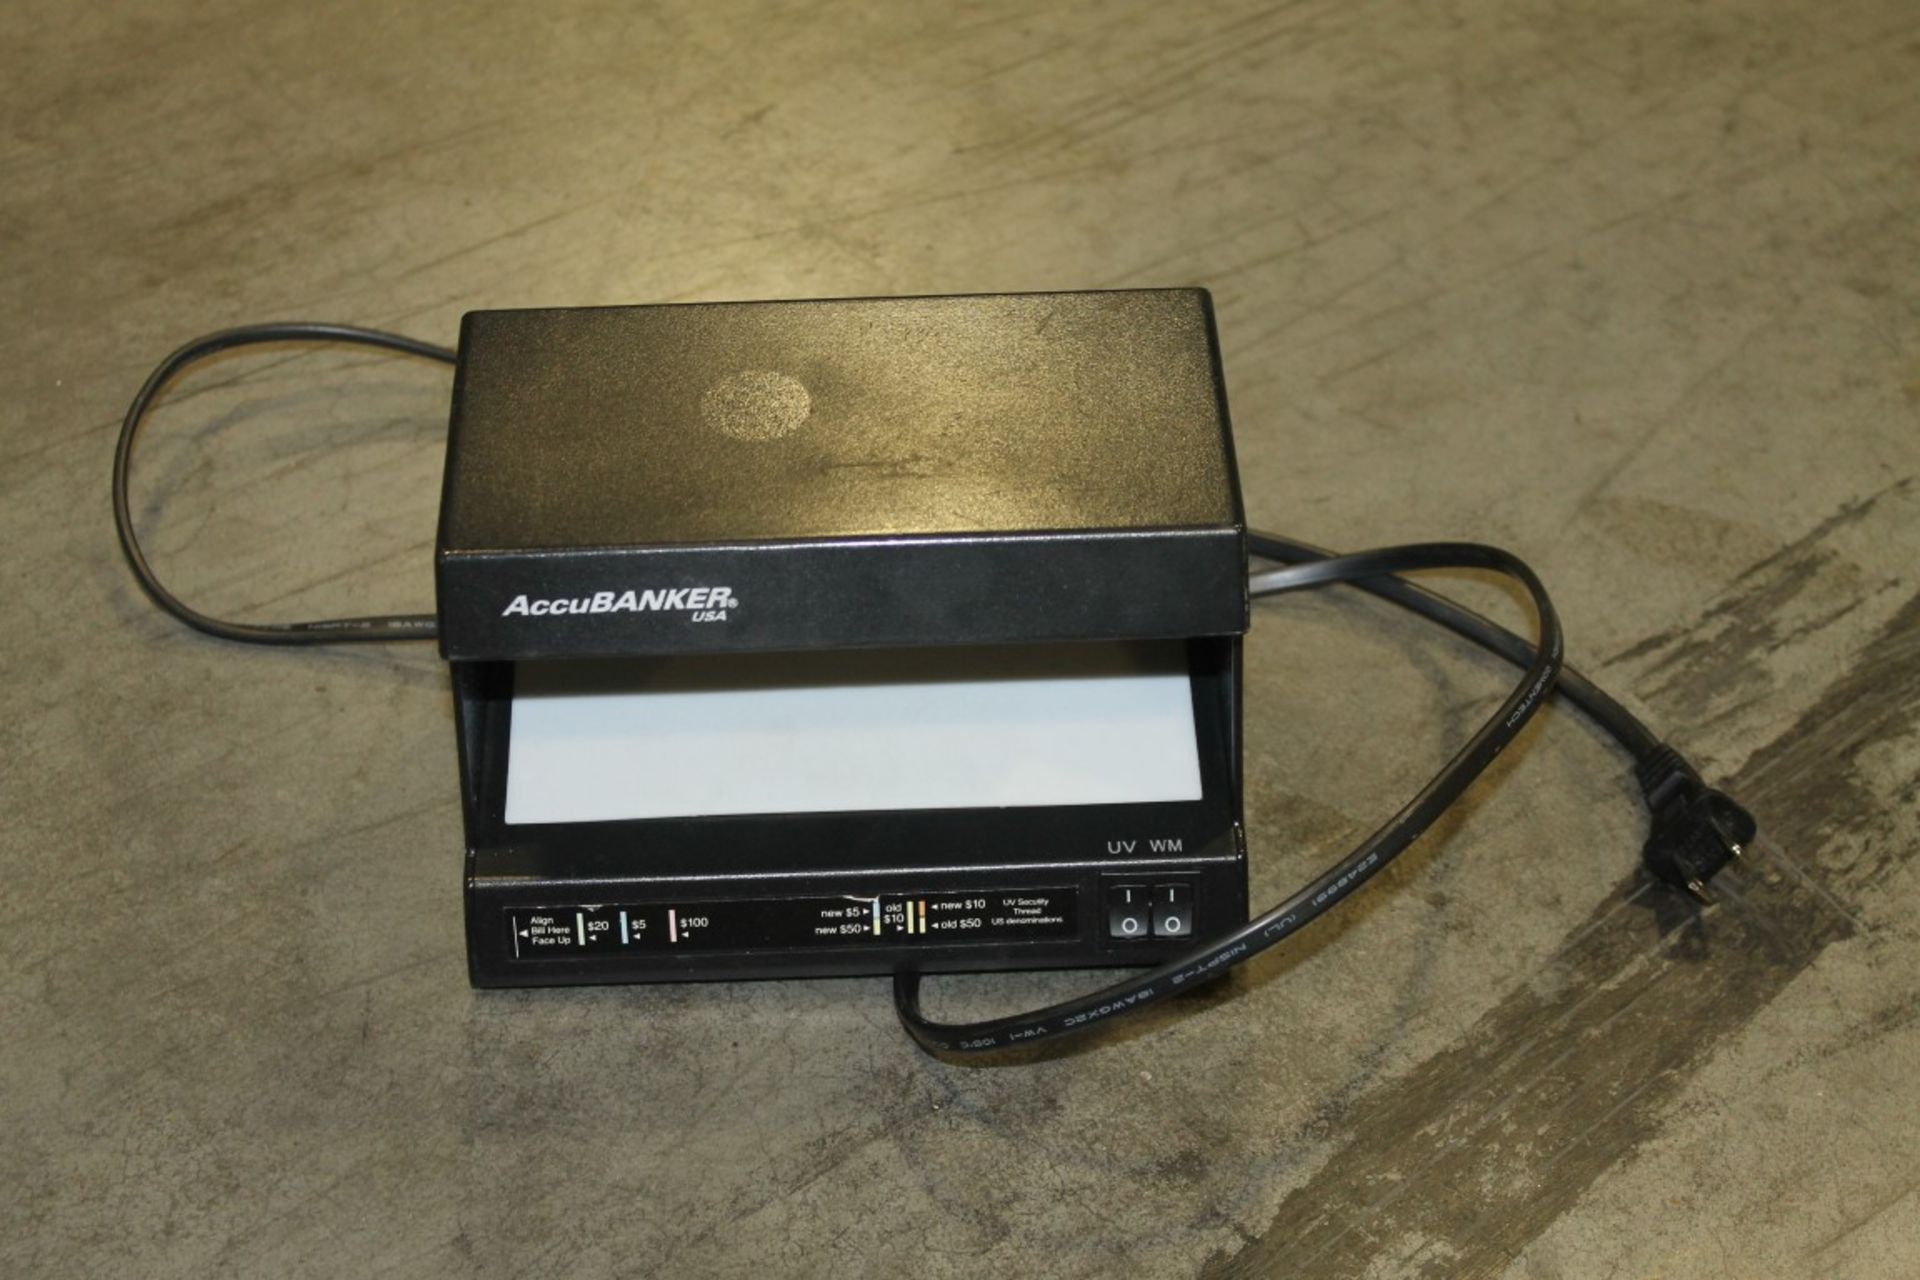 ACCUBANKER D63 COMPACT COUNTERFEIT DETECTOR WITH UV ULTRAVIOLET AND WATERMARK DETECTION